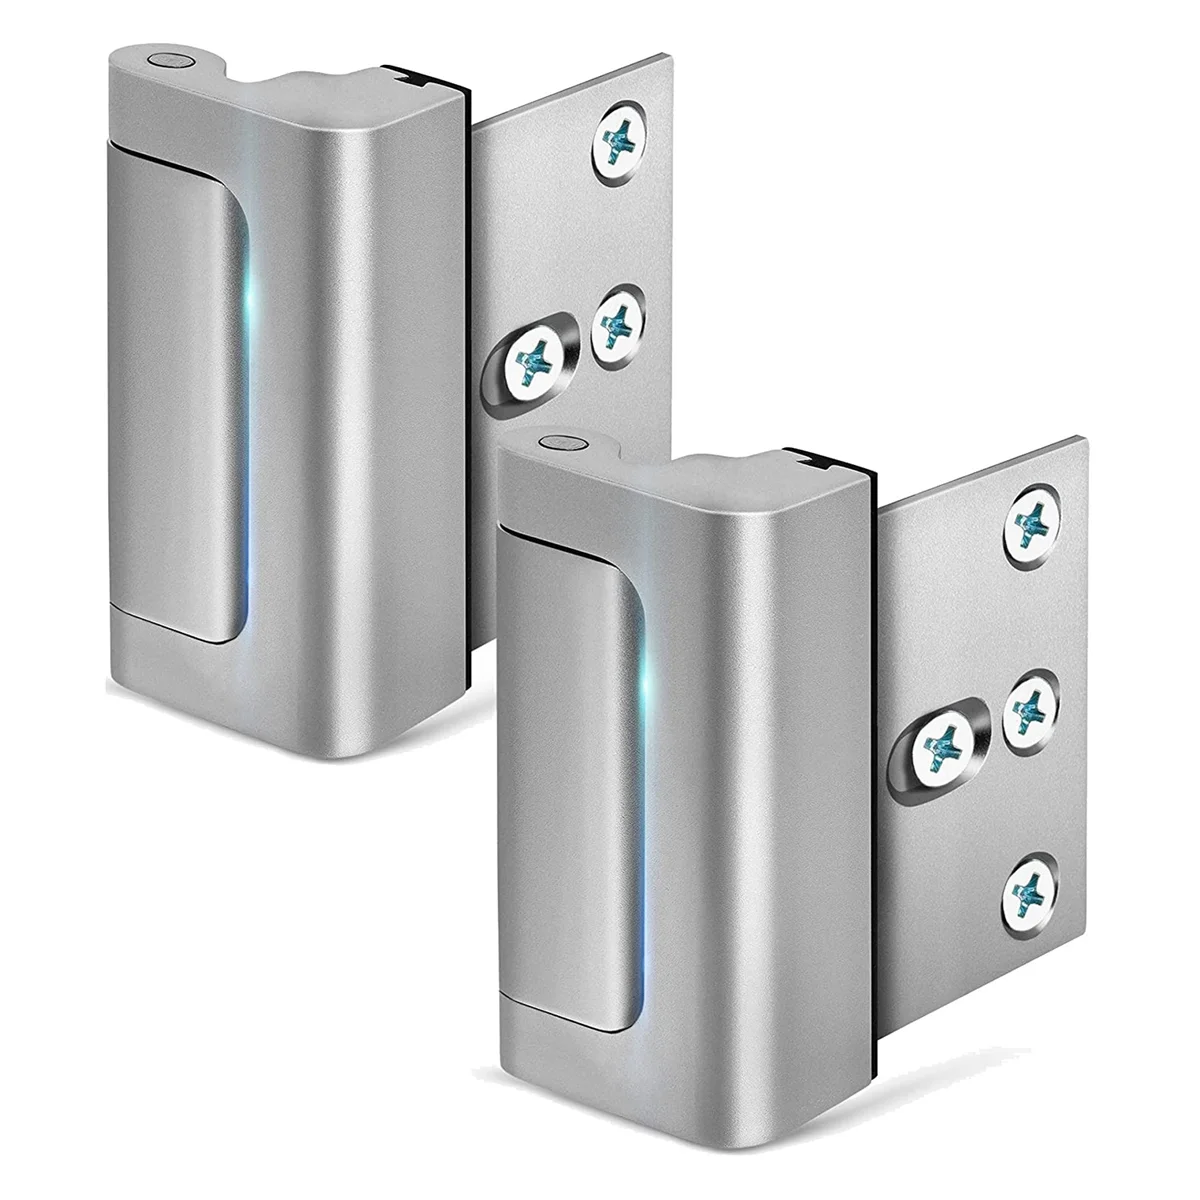 

Safety Door Lock, Child Proof Door Reinforcement Lock, with 3 Inch Stop, Can Withstand 800 Pounds (Silver-2 Bag)